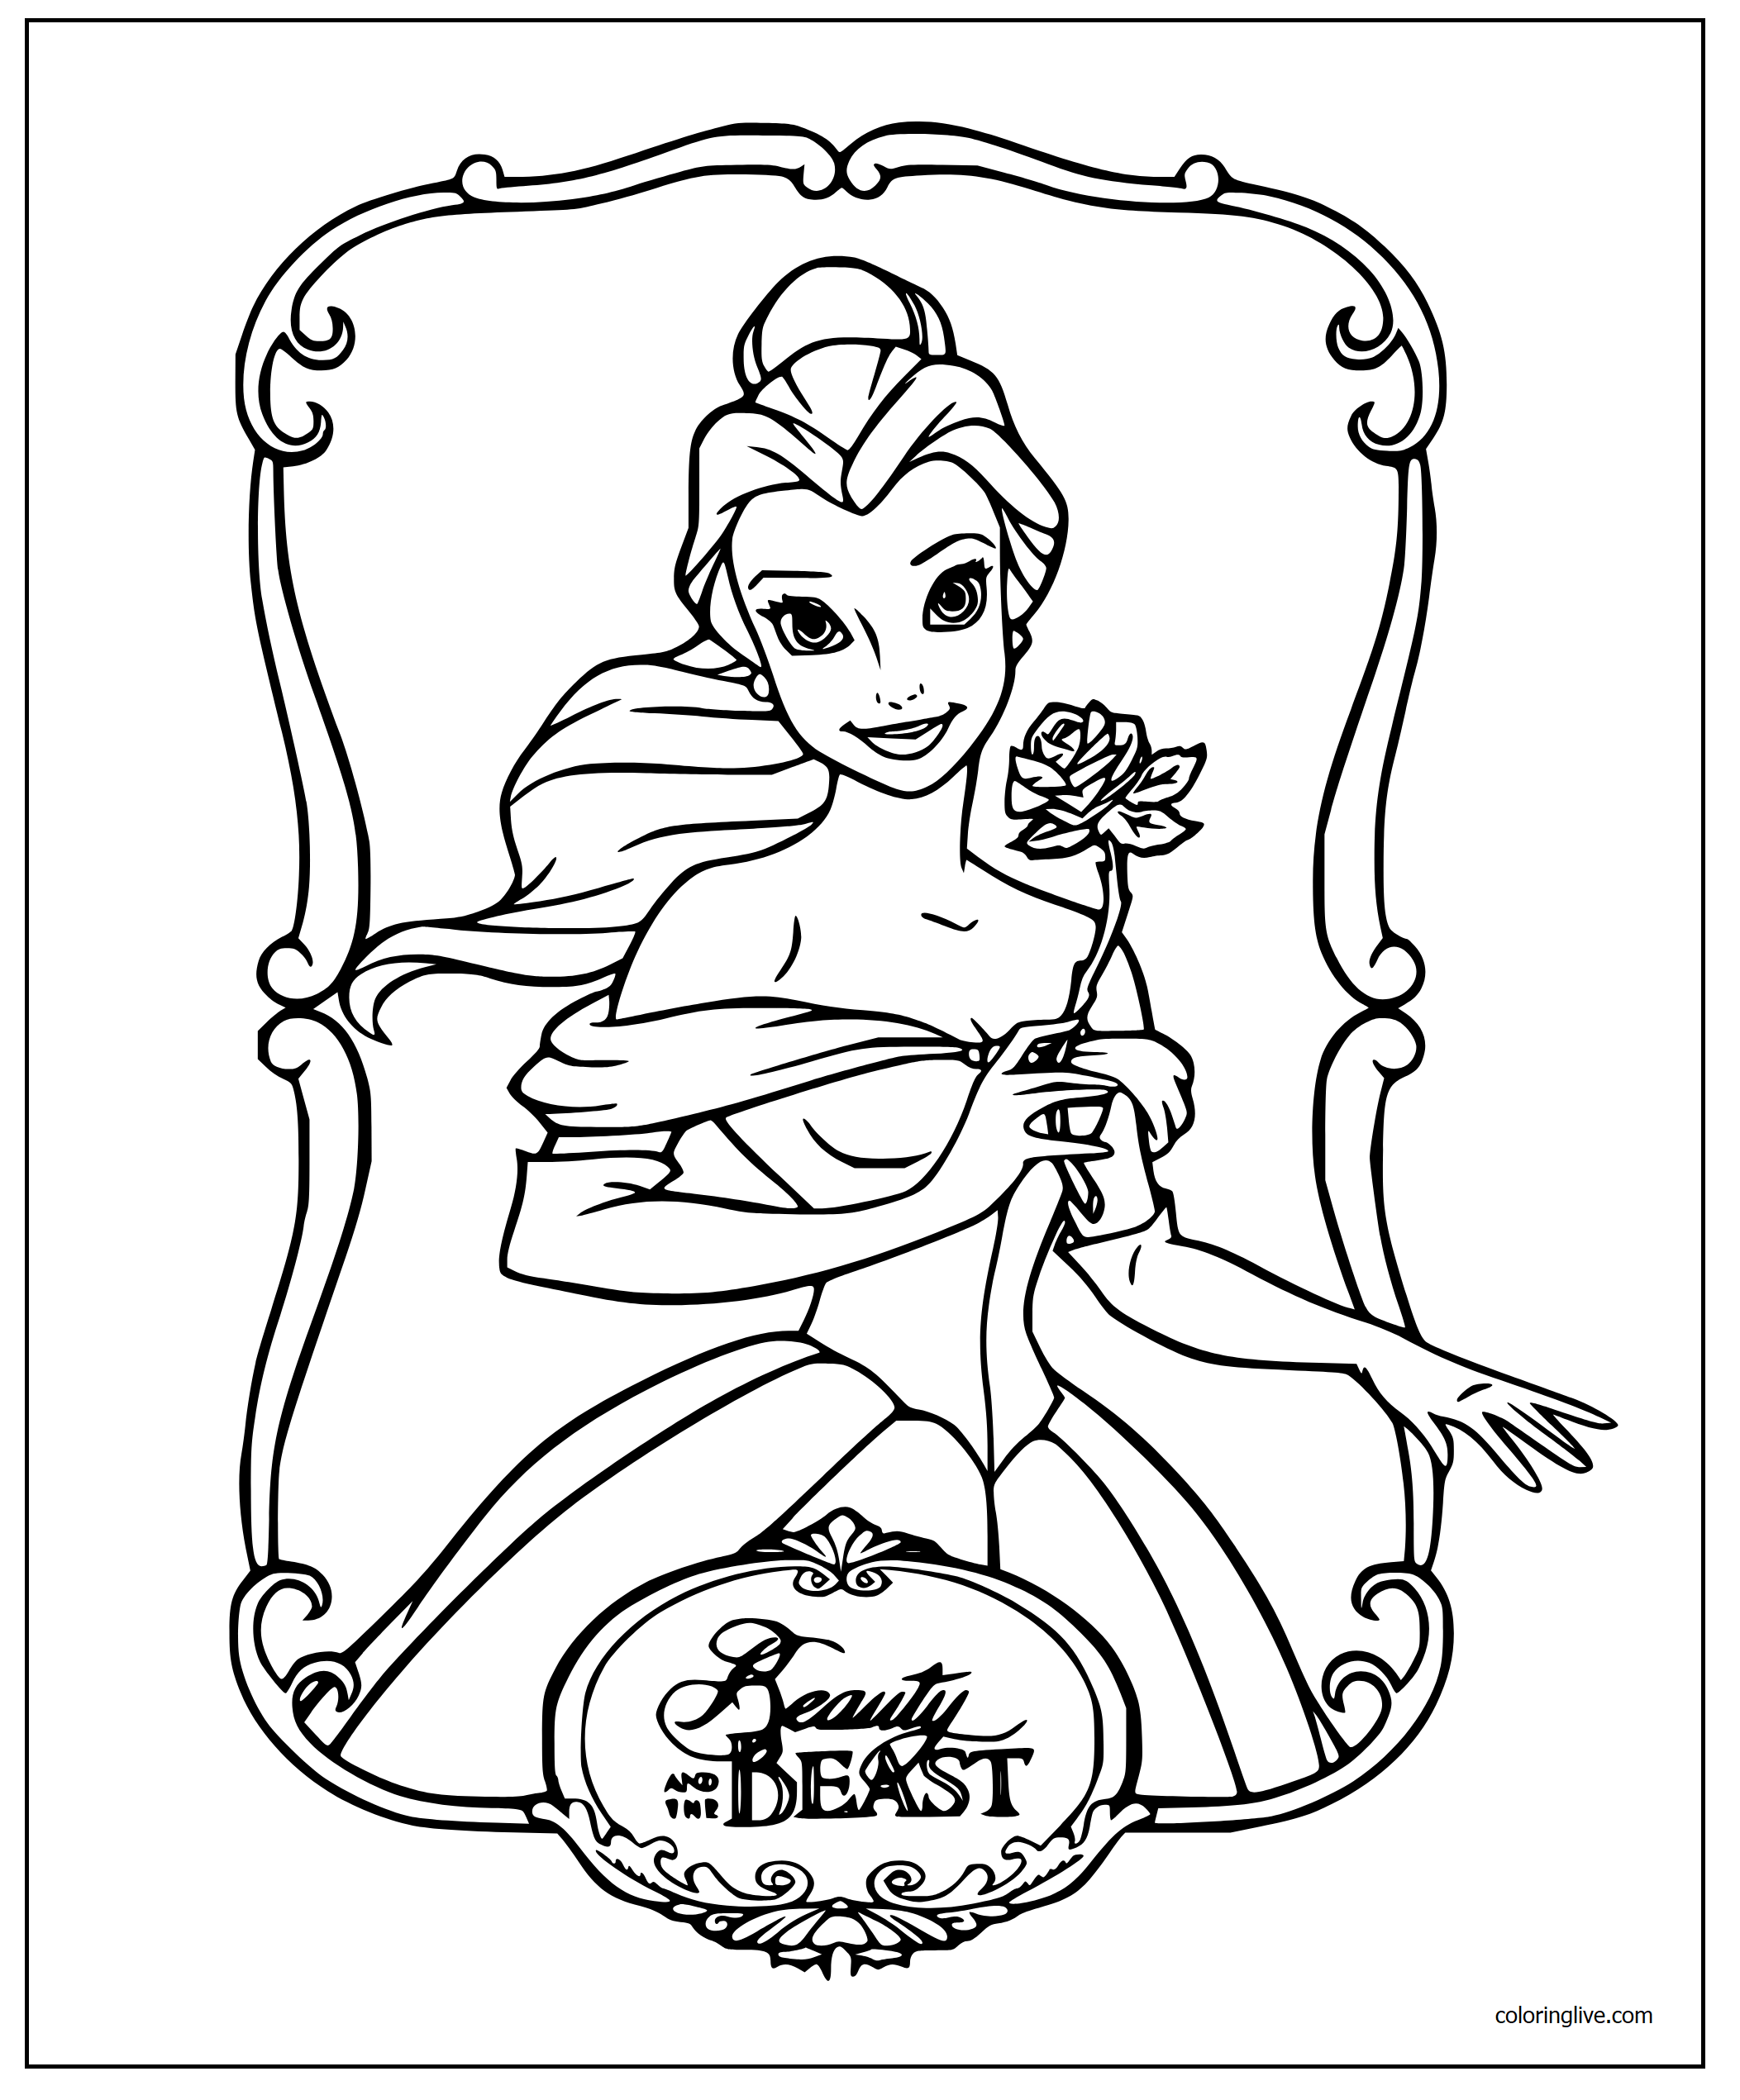 Printable belle from Beauty and the Beast Coloring Page for kids.